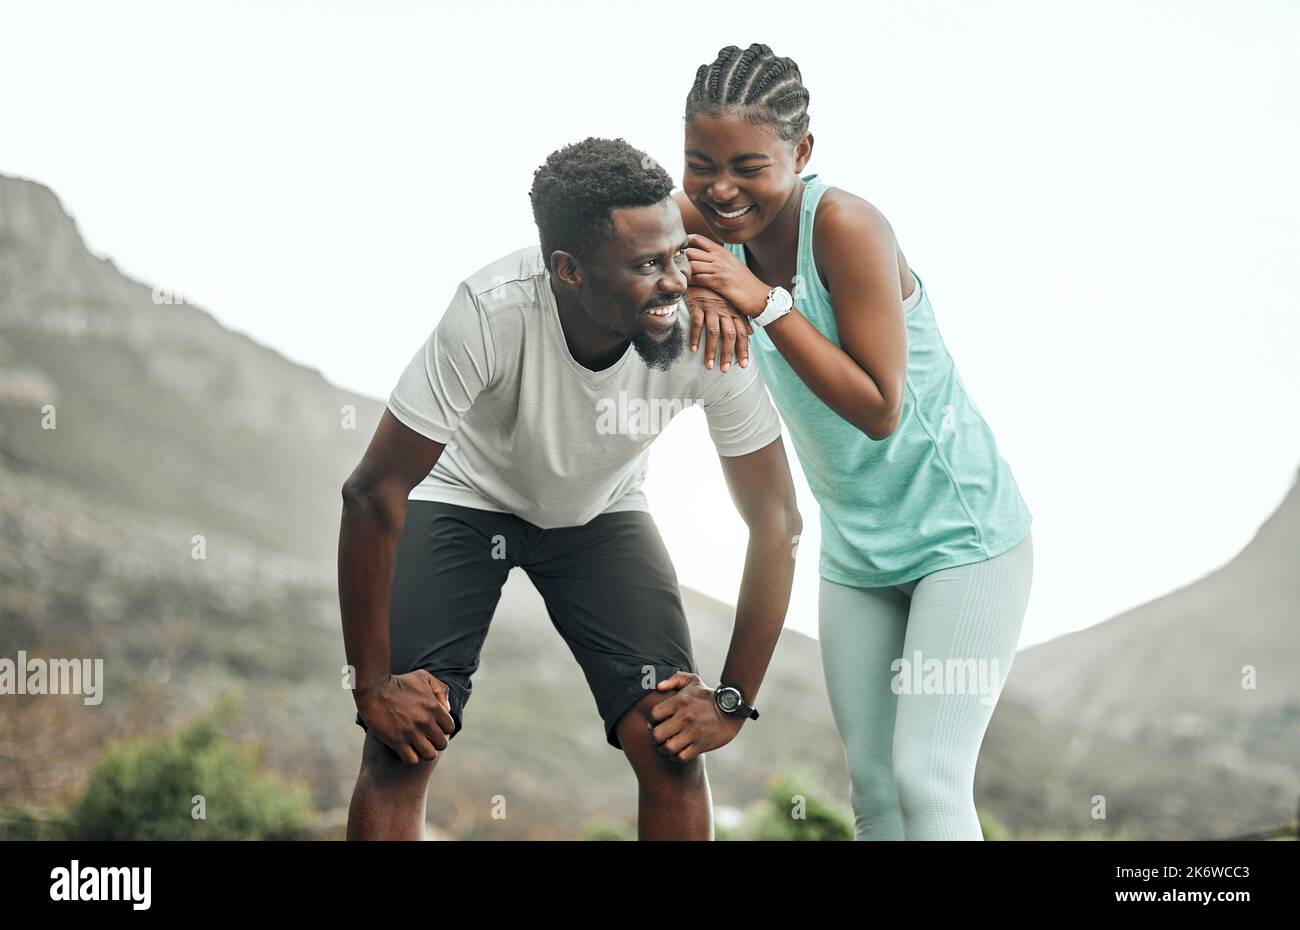 Taking break to catch our breath. a young couple taking a break during a workout. Stock Photo